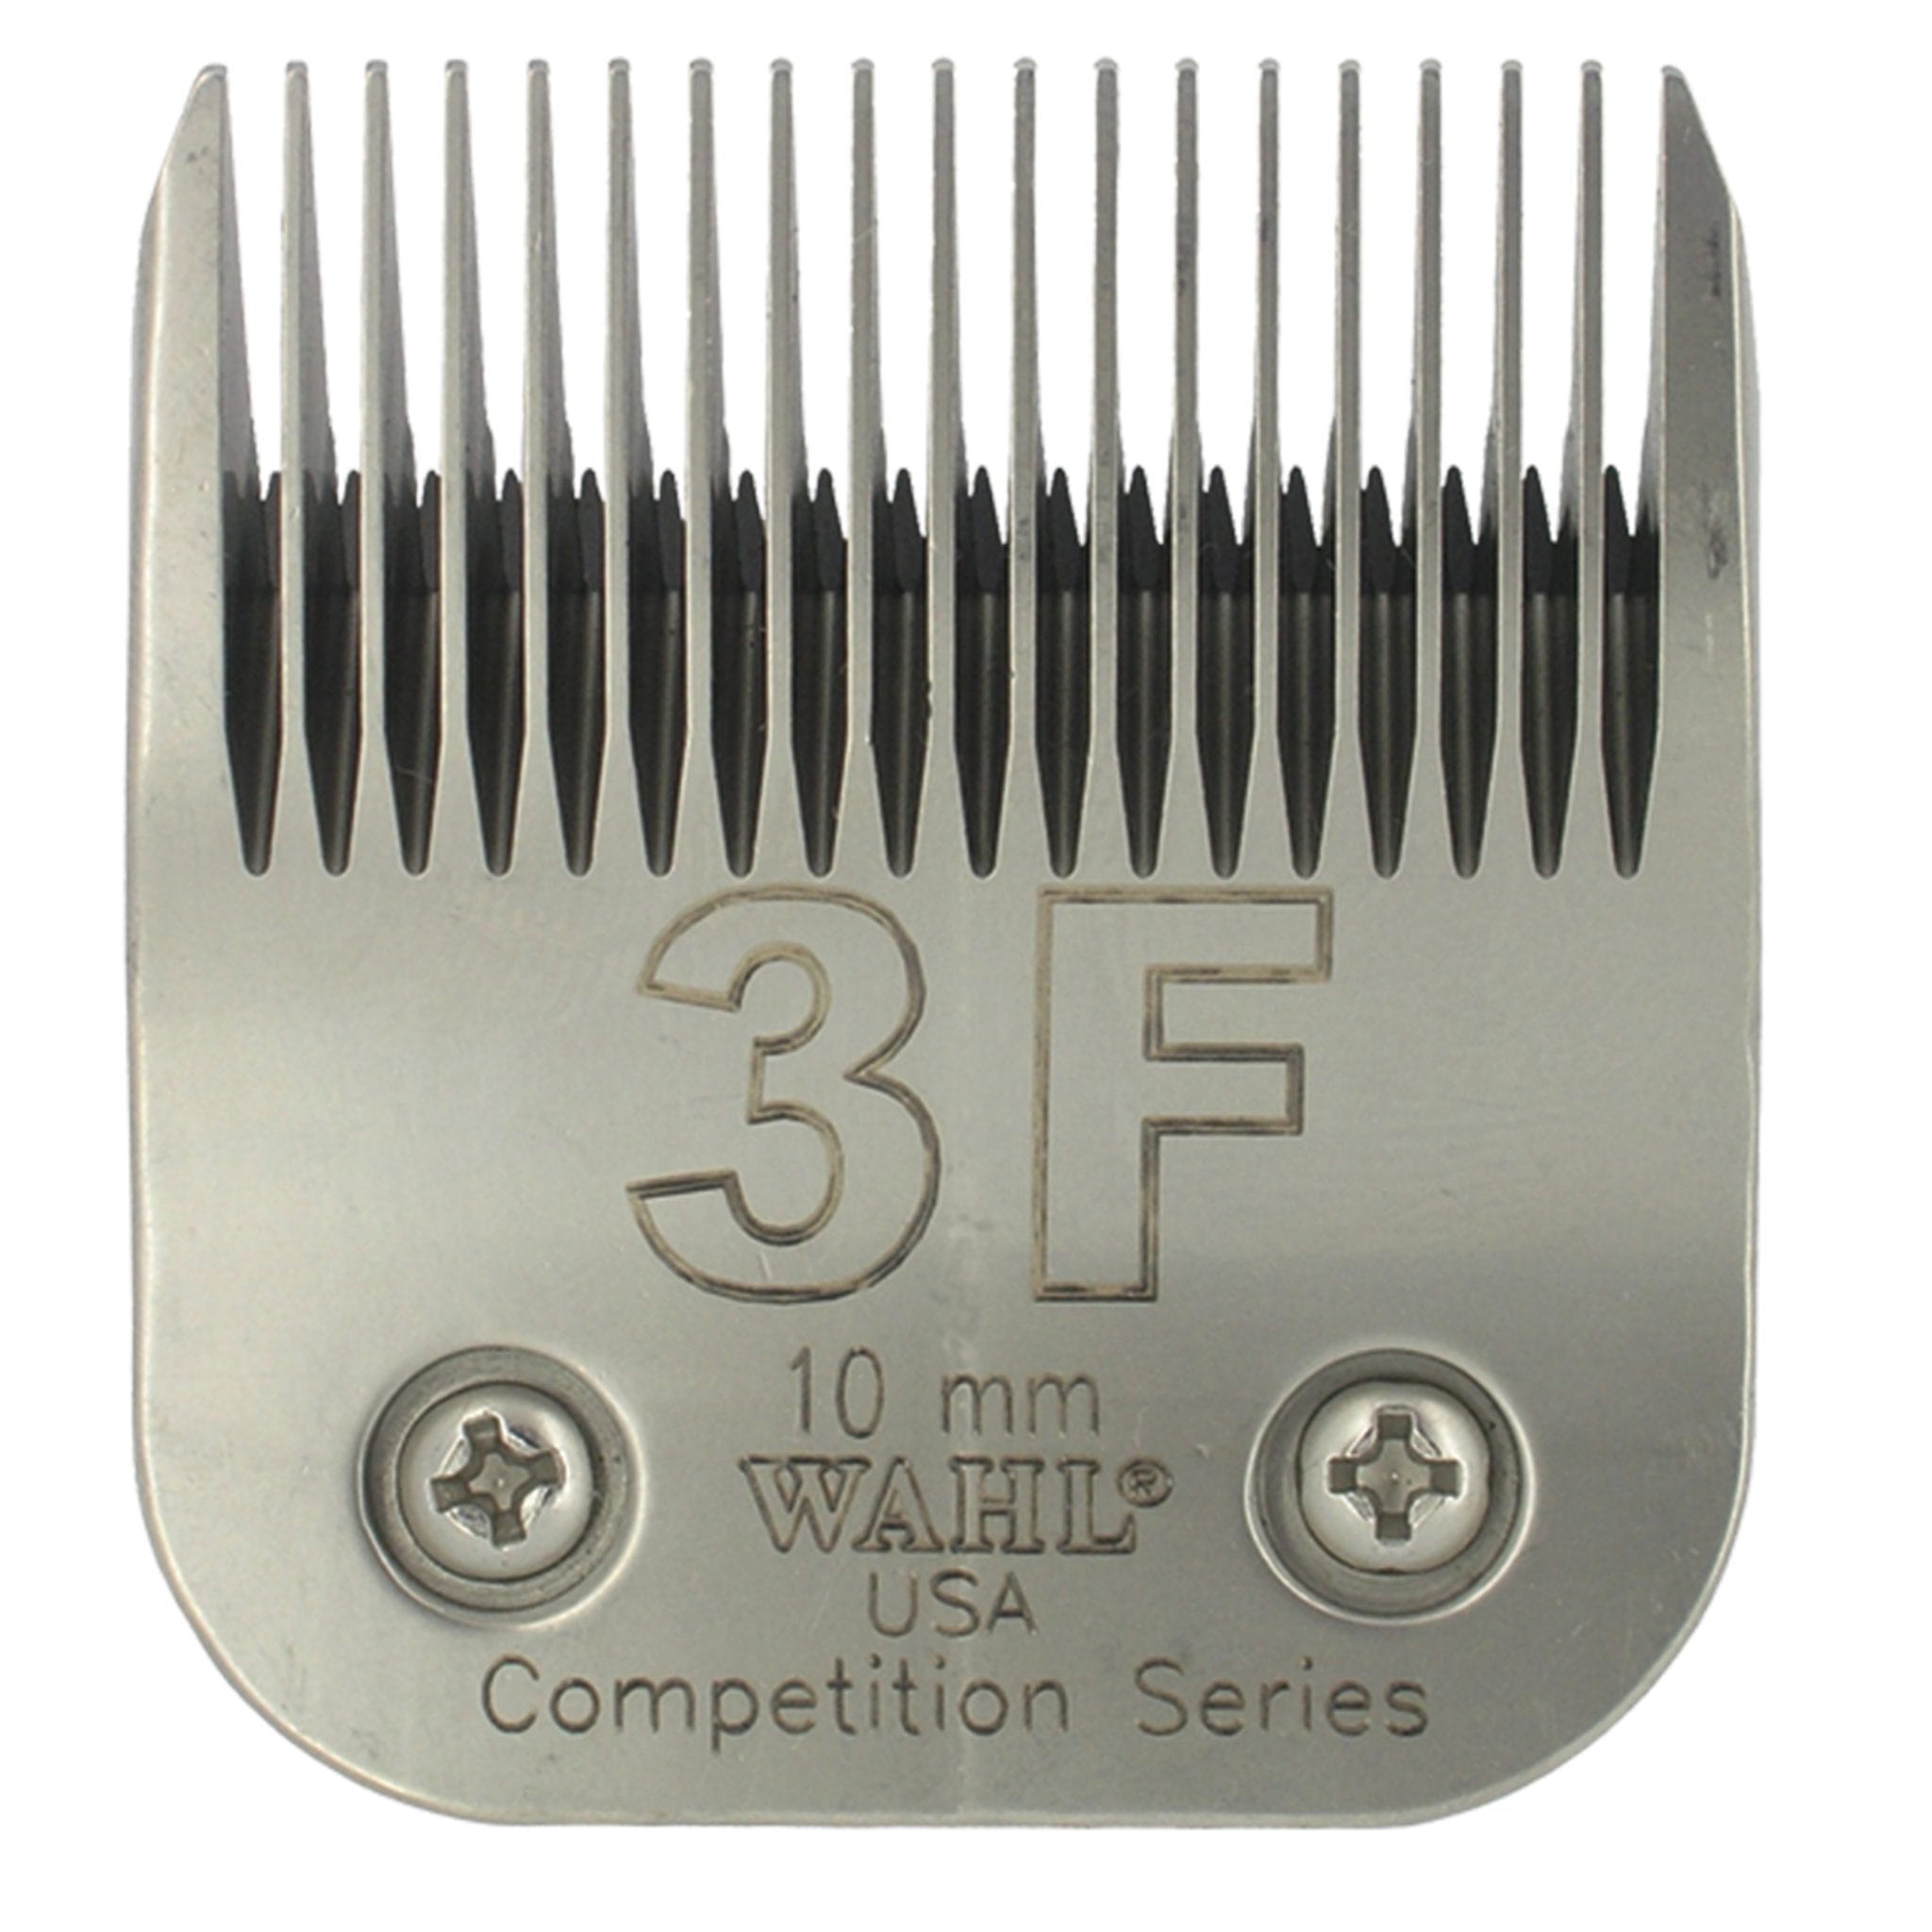 Wahl size 3F blade